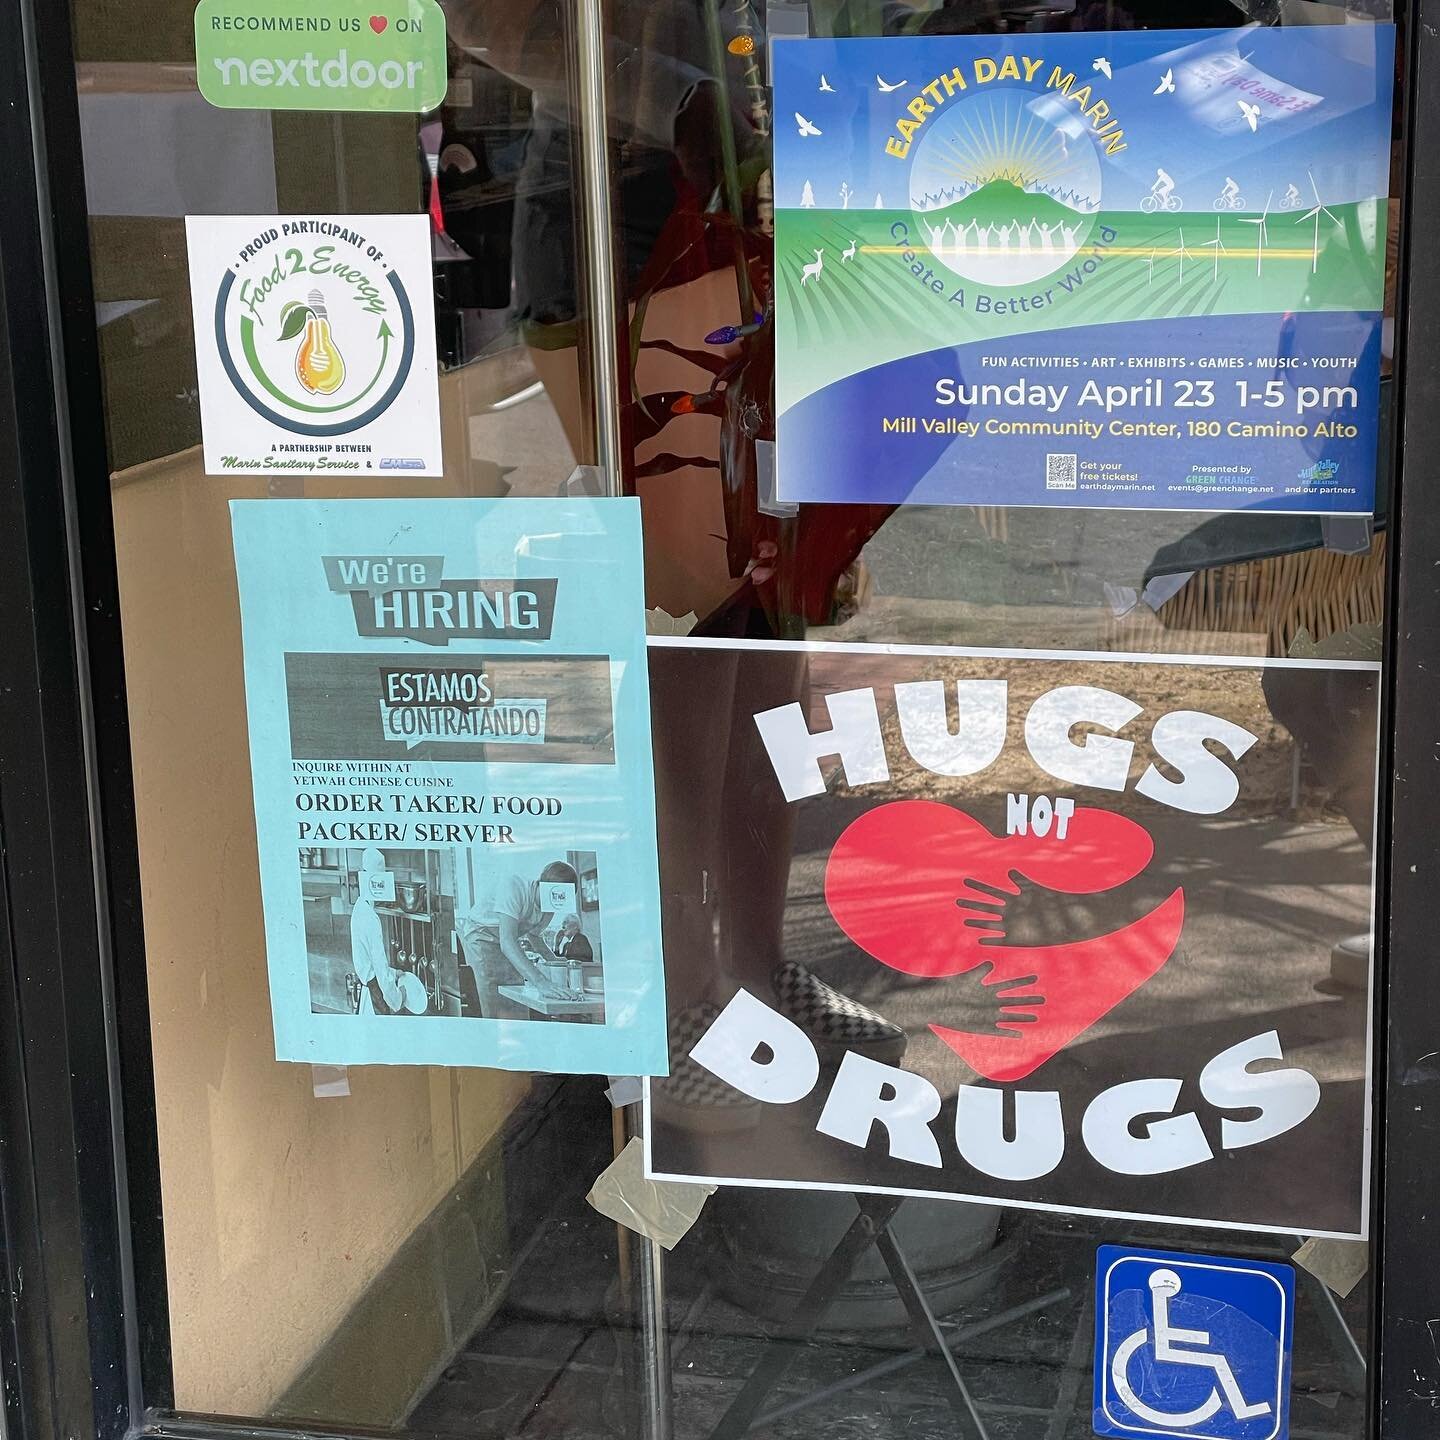 A recent project led by @riya.aghi to create informative flyers for the San Rafael area. More to come! #tobaccofree #community #hugsnotdrugs